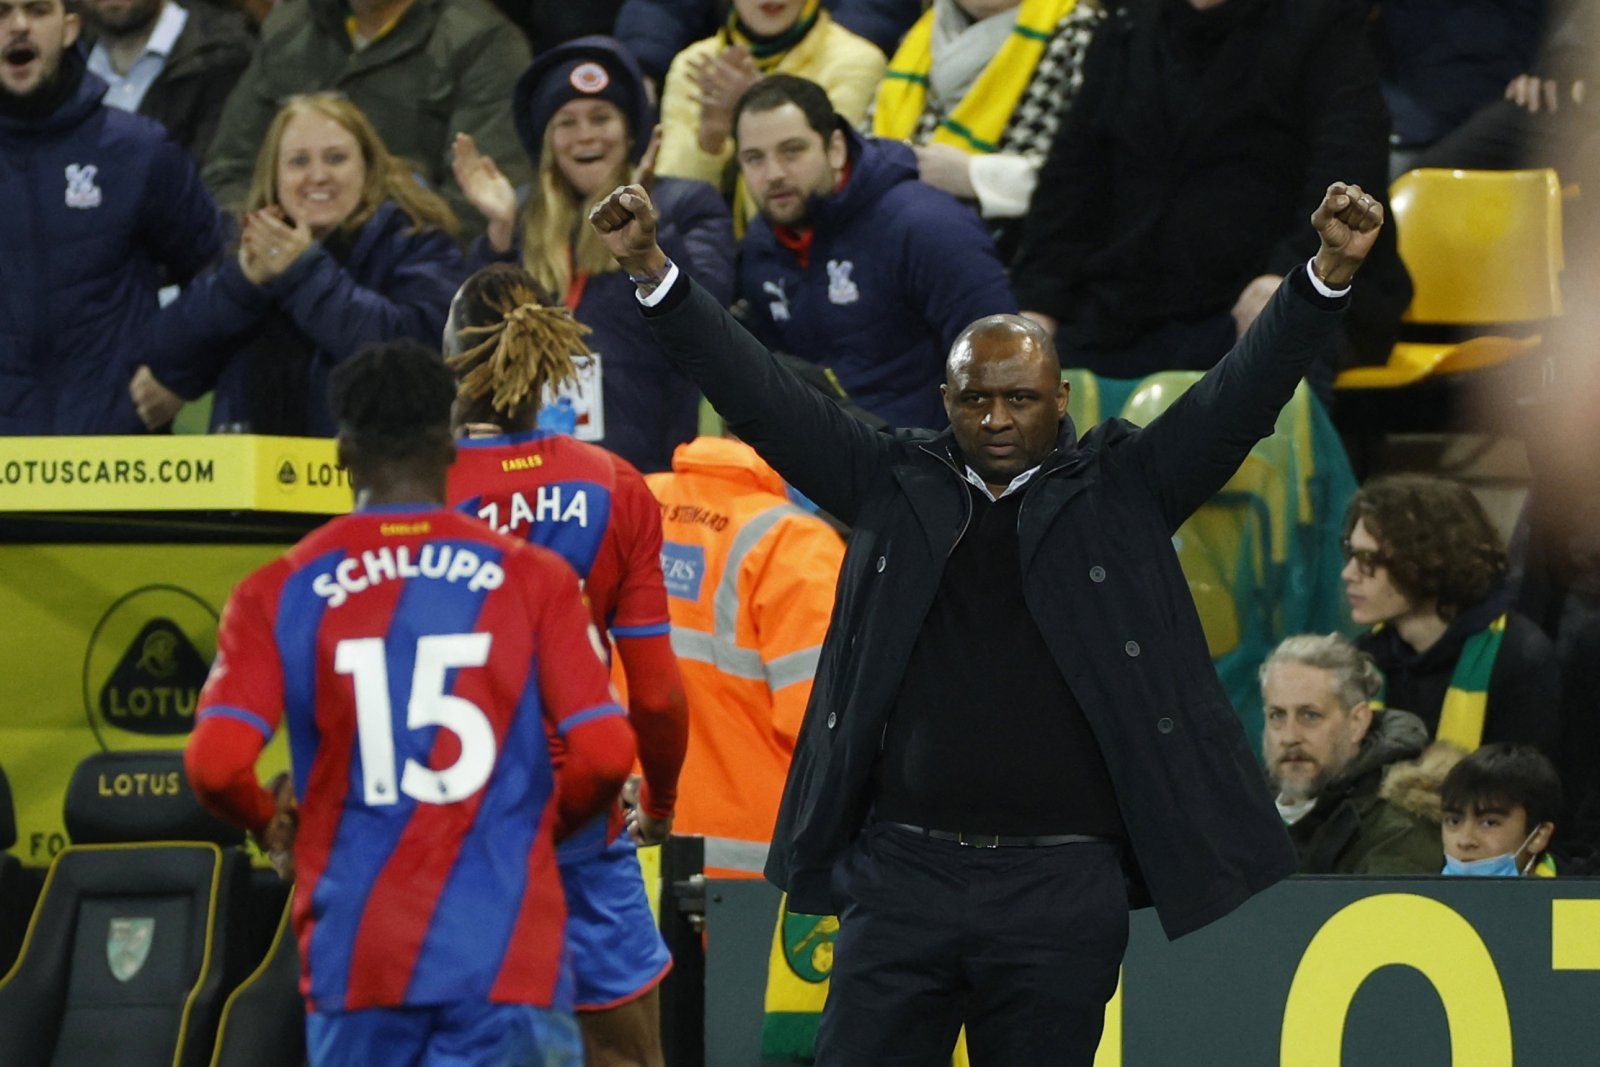 Crystal Palace: Andersen, Mateta and Schlupp struggle against Norwich -Crystal Palace